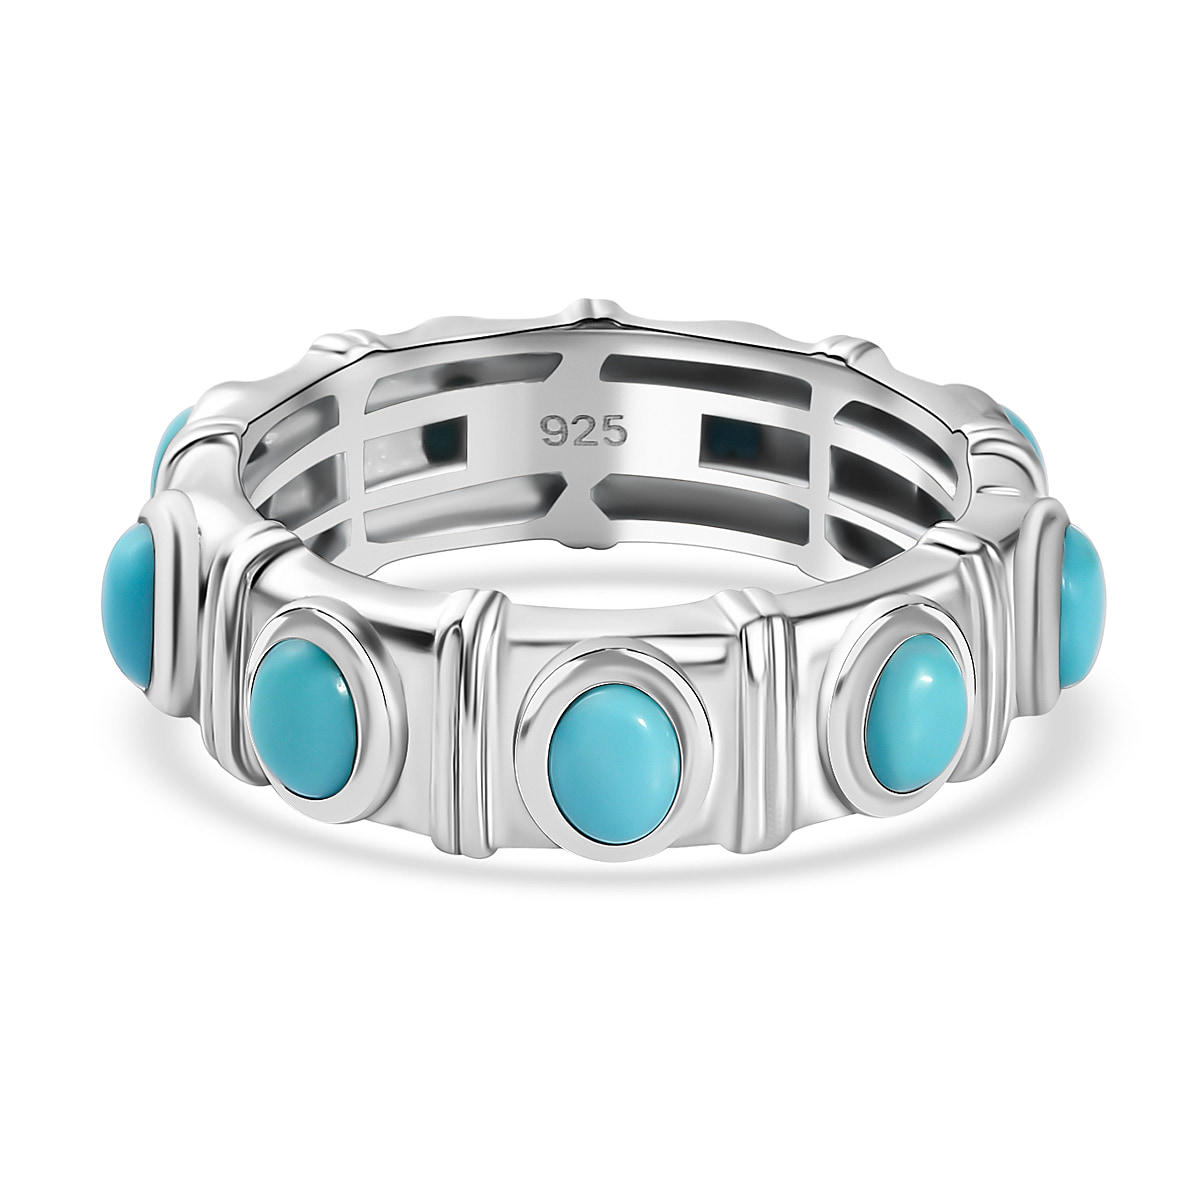 Arizona Sleeping Beauty Turquoise Band Ring in Platinum Overlay Sterling Silver 1.53 Ct